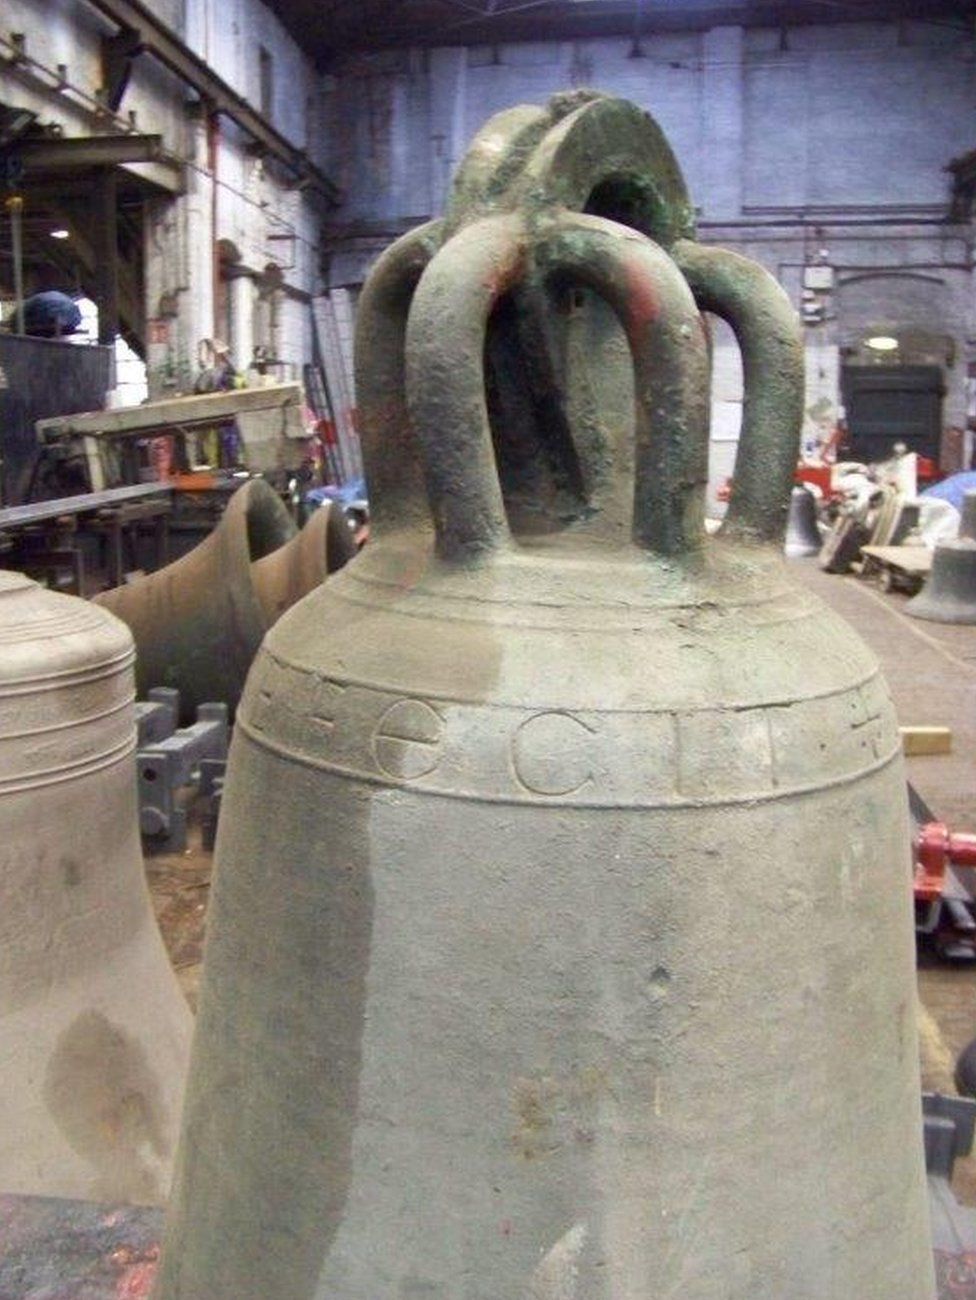 The bell's inscription